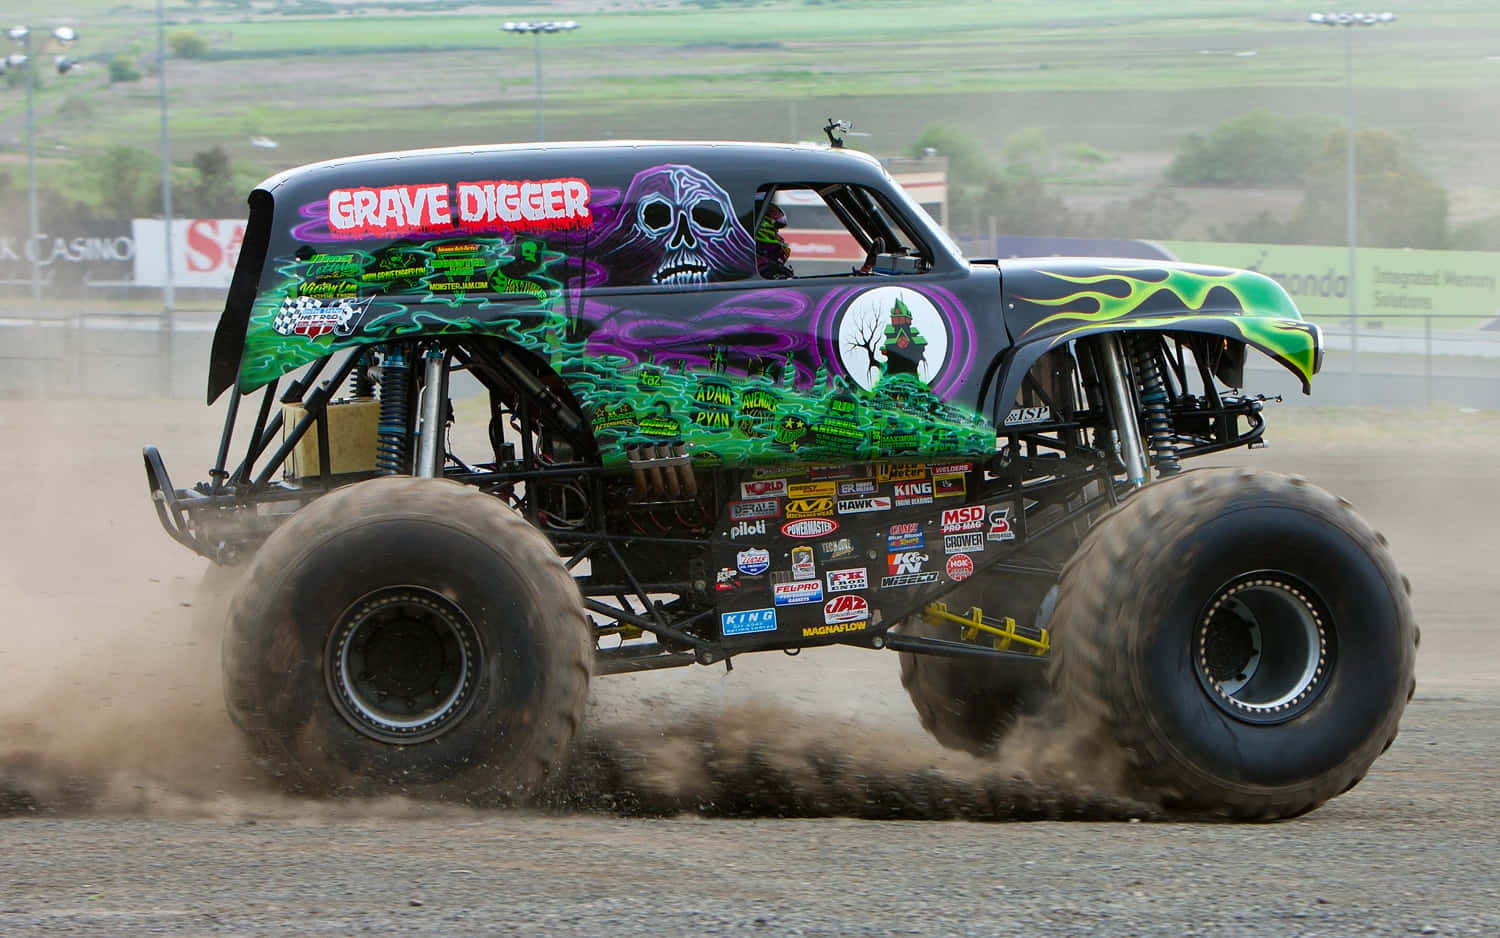 Grave Digger Monster Truck Sand Dust Picture